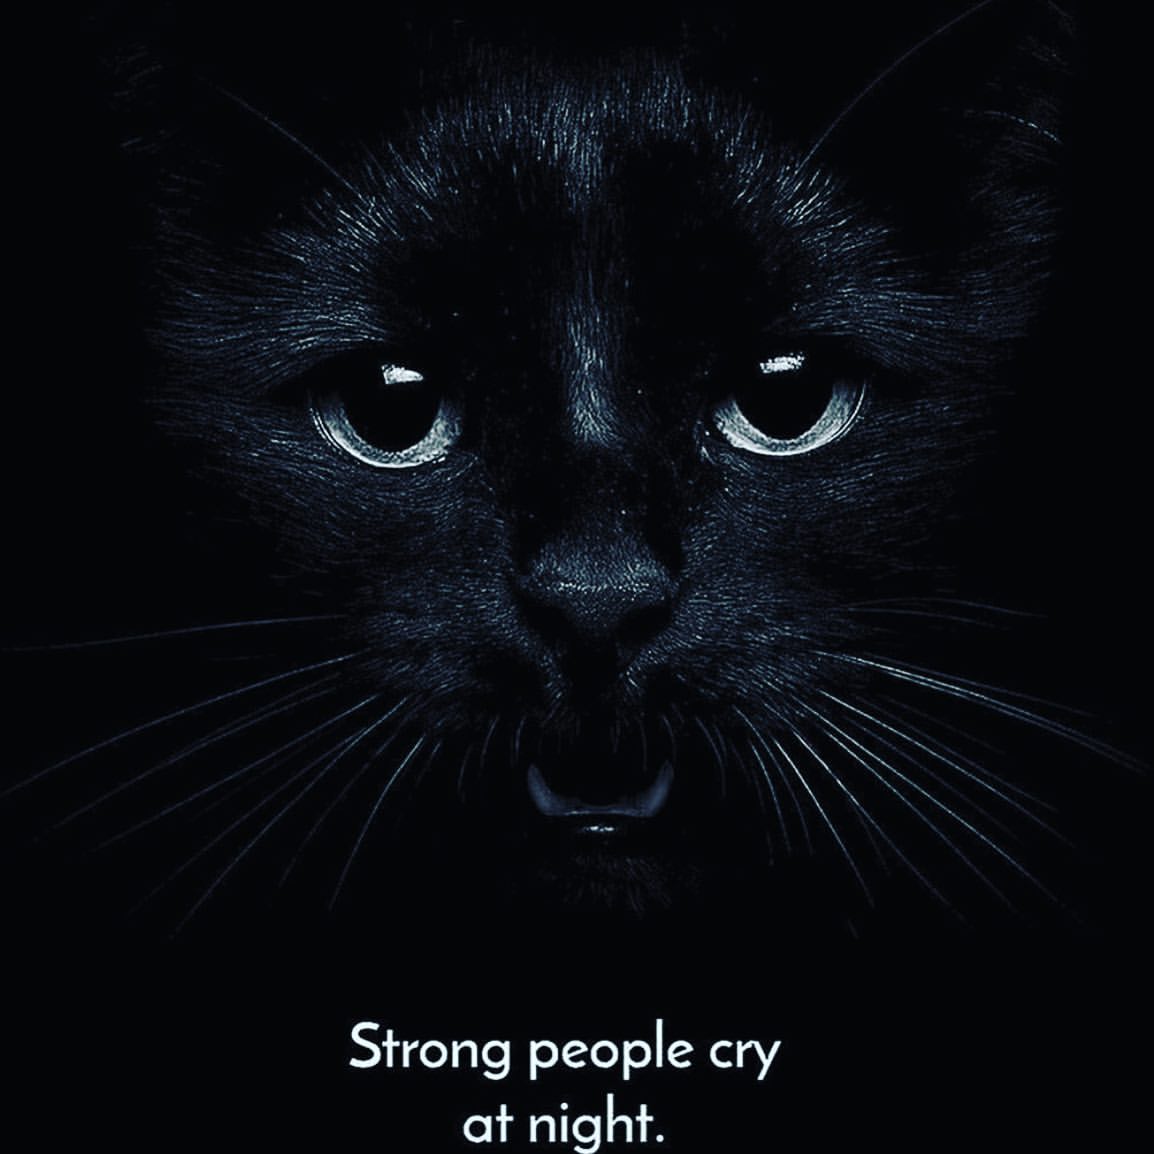 Strong people cry at night.